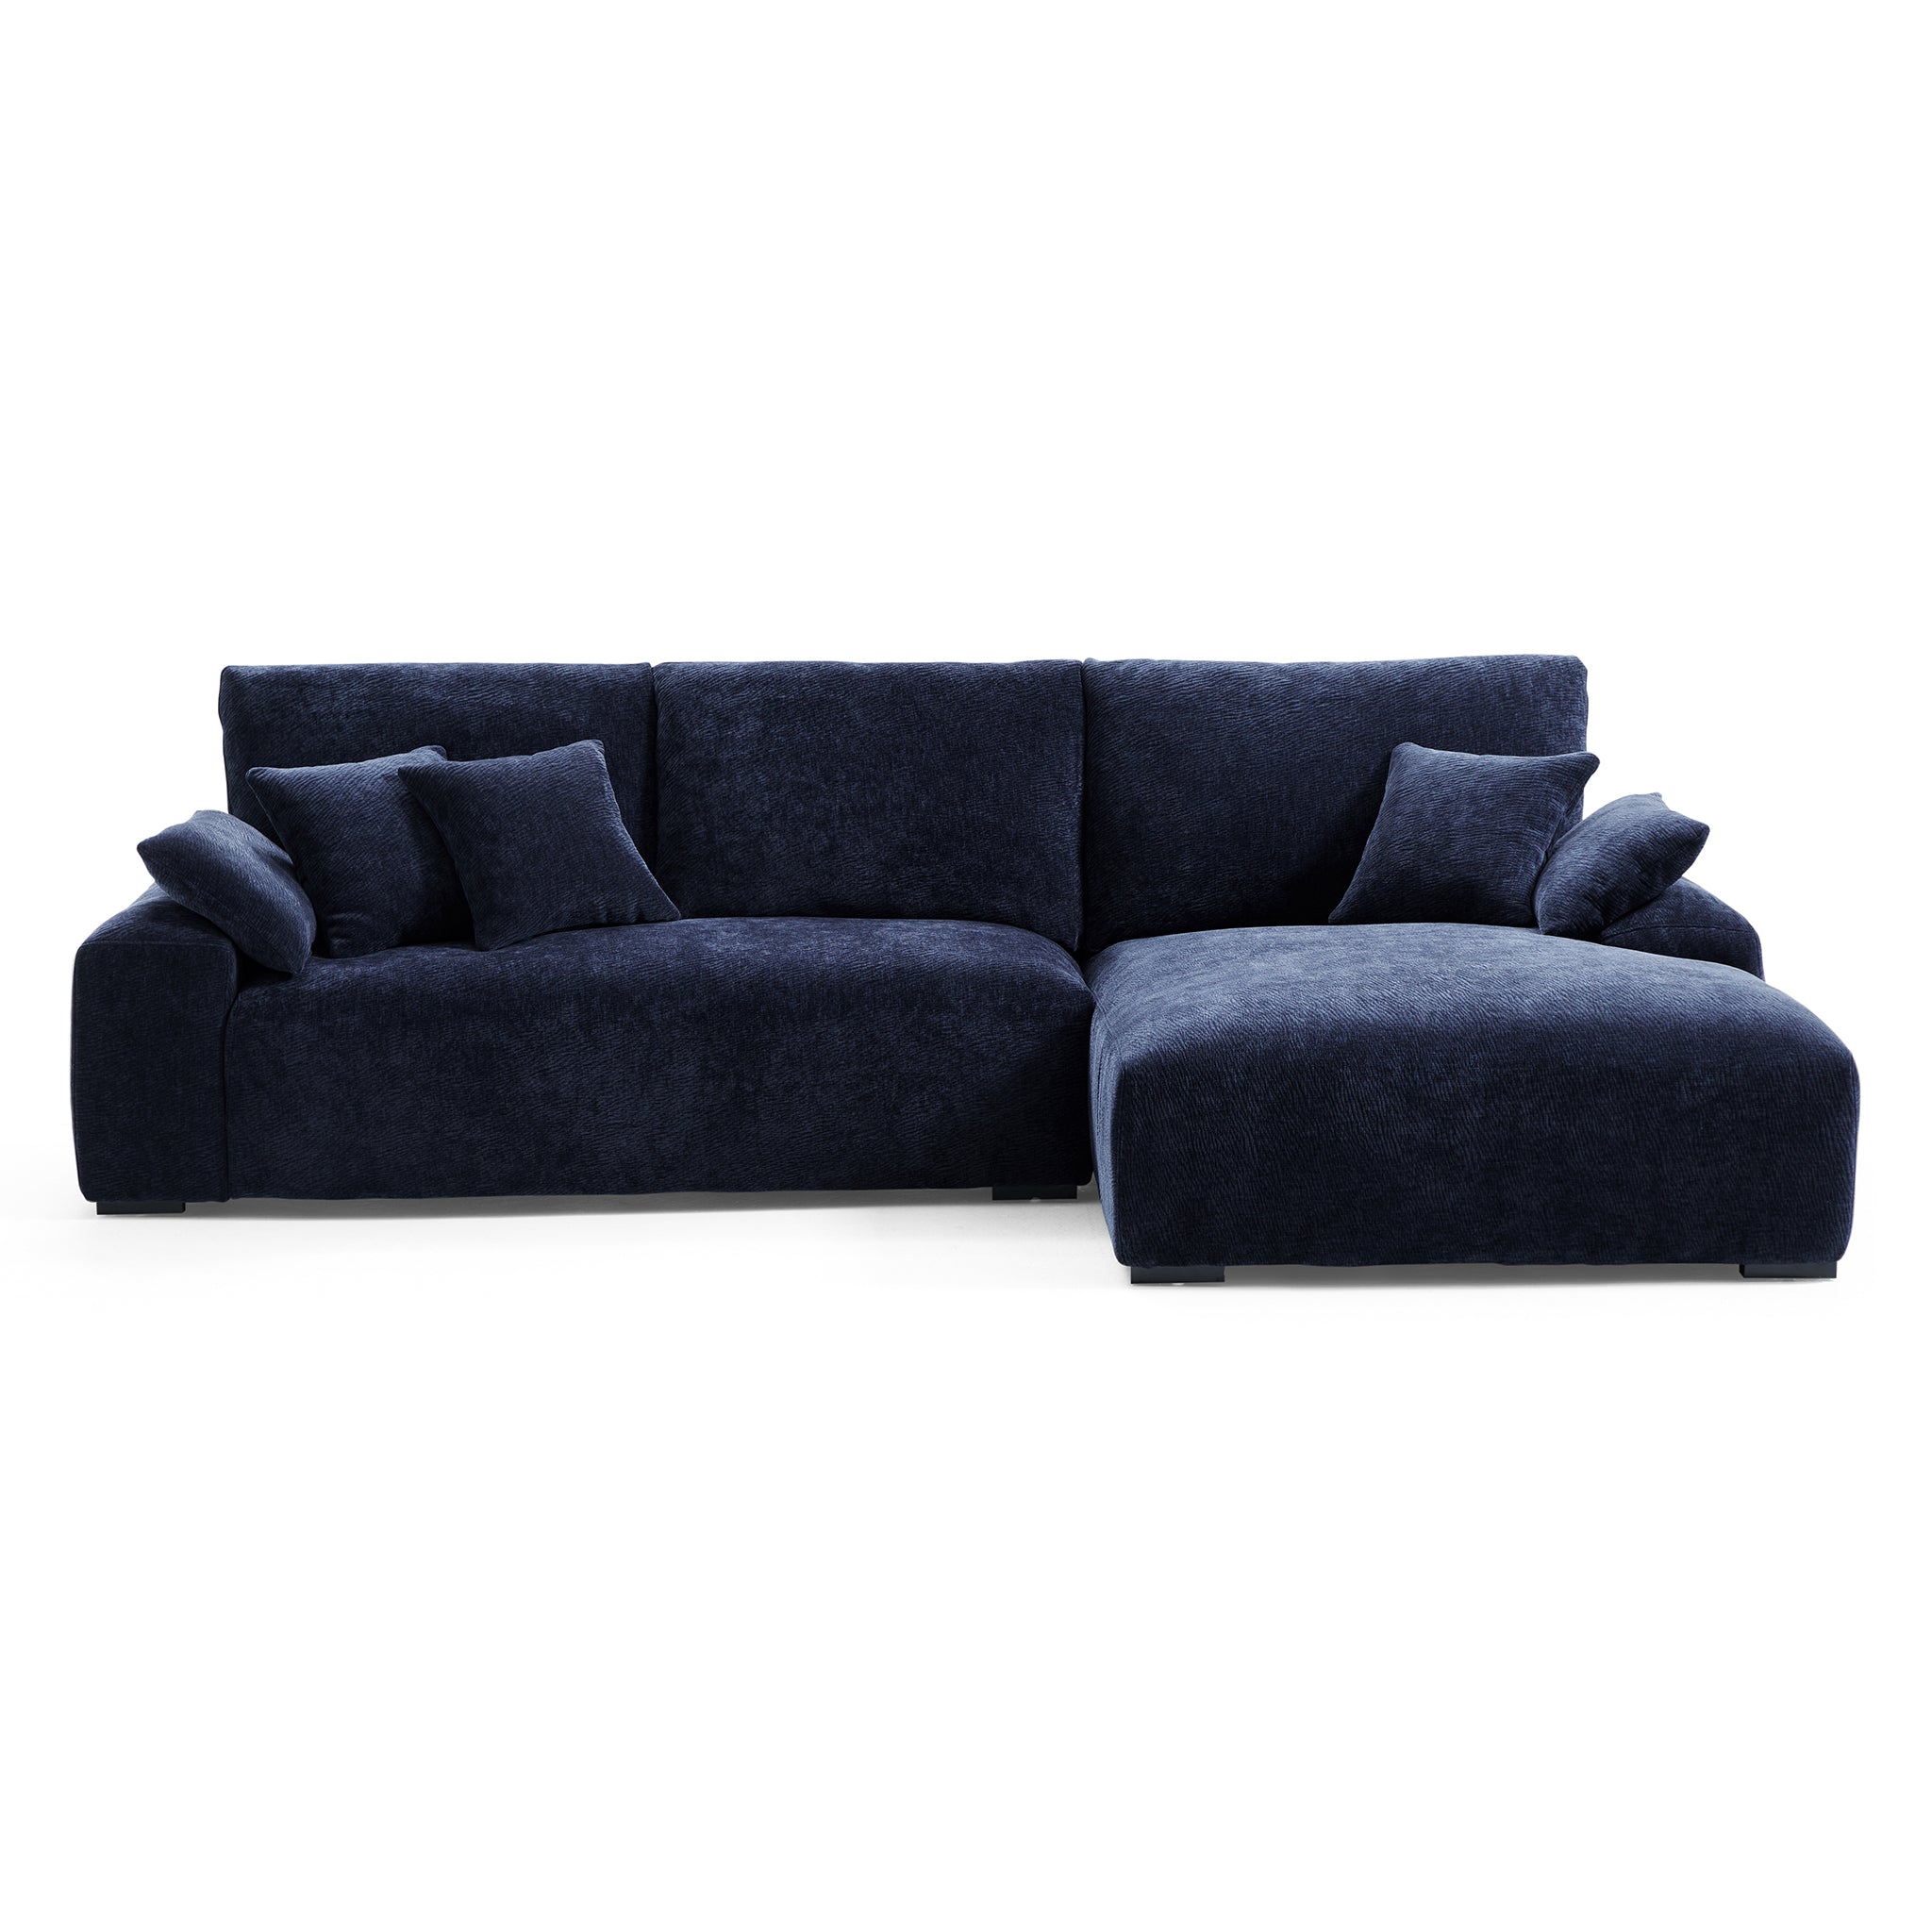 The Empress Navy Blue Sectional